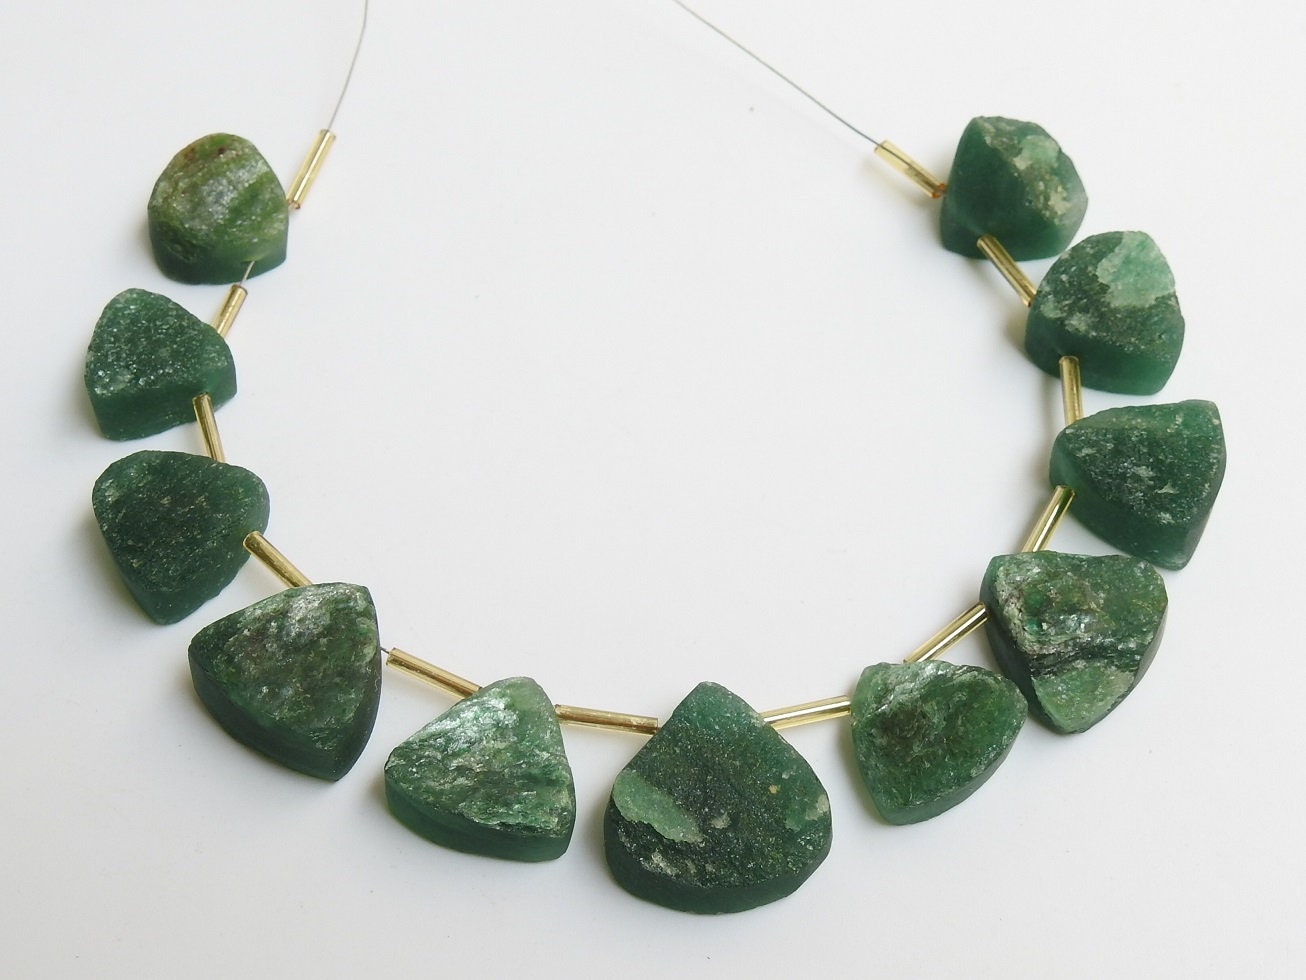 Natural Green Aventurine Druzy,Loose Rough,Raw Stone,Triangle Shape,11Piece Strand 20X20To13X13 MM Approx,Wholesaler,Supplies PME-R6 | Save 33% - Rajasthan Living 14